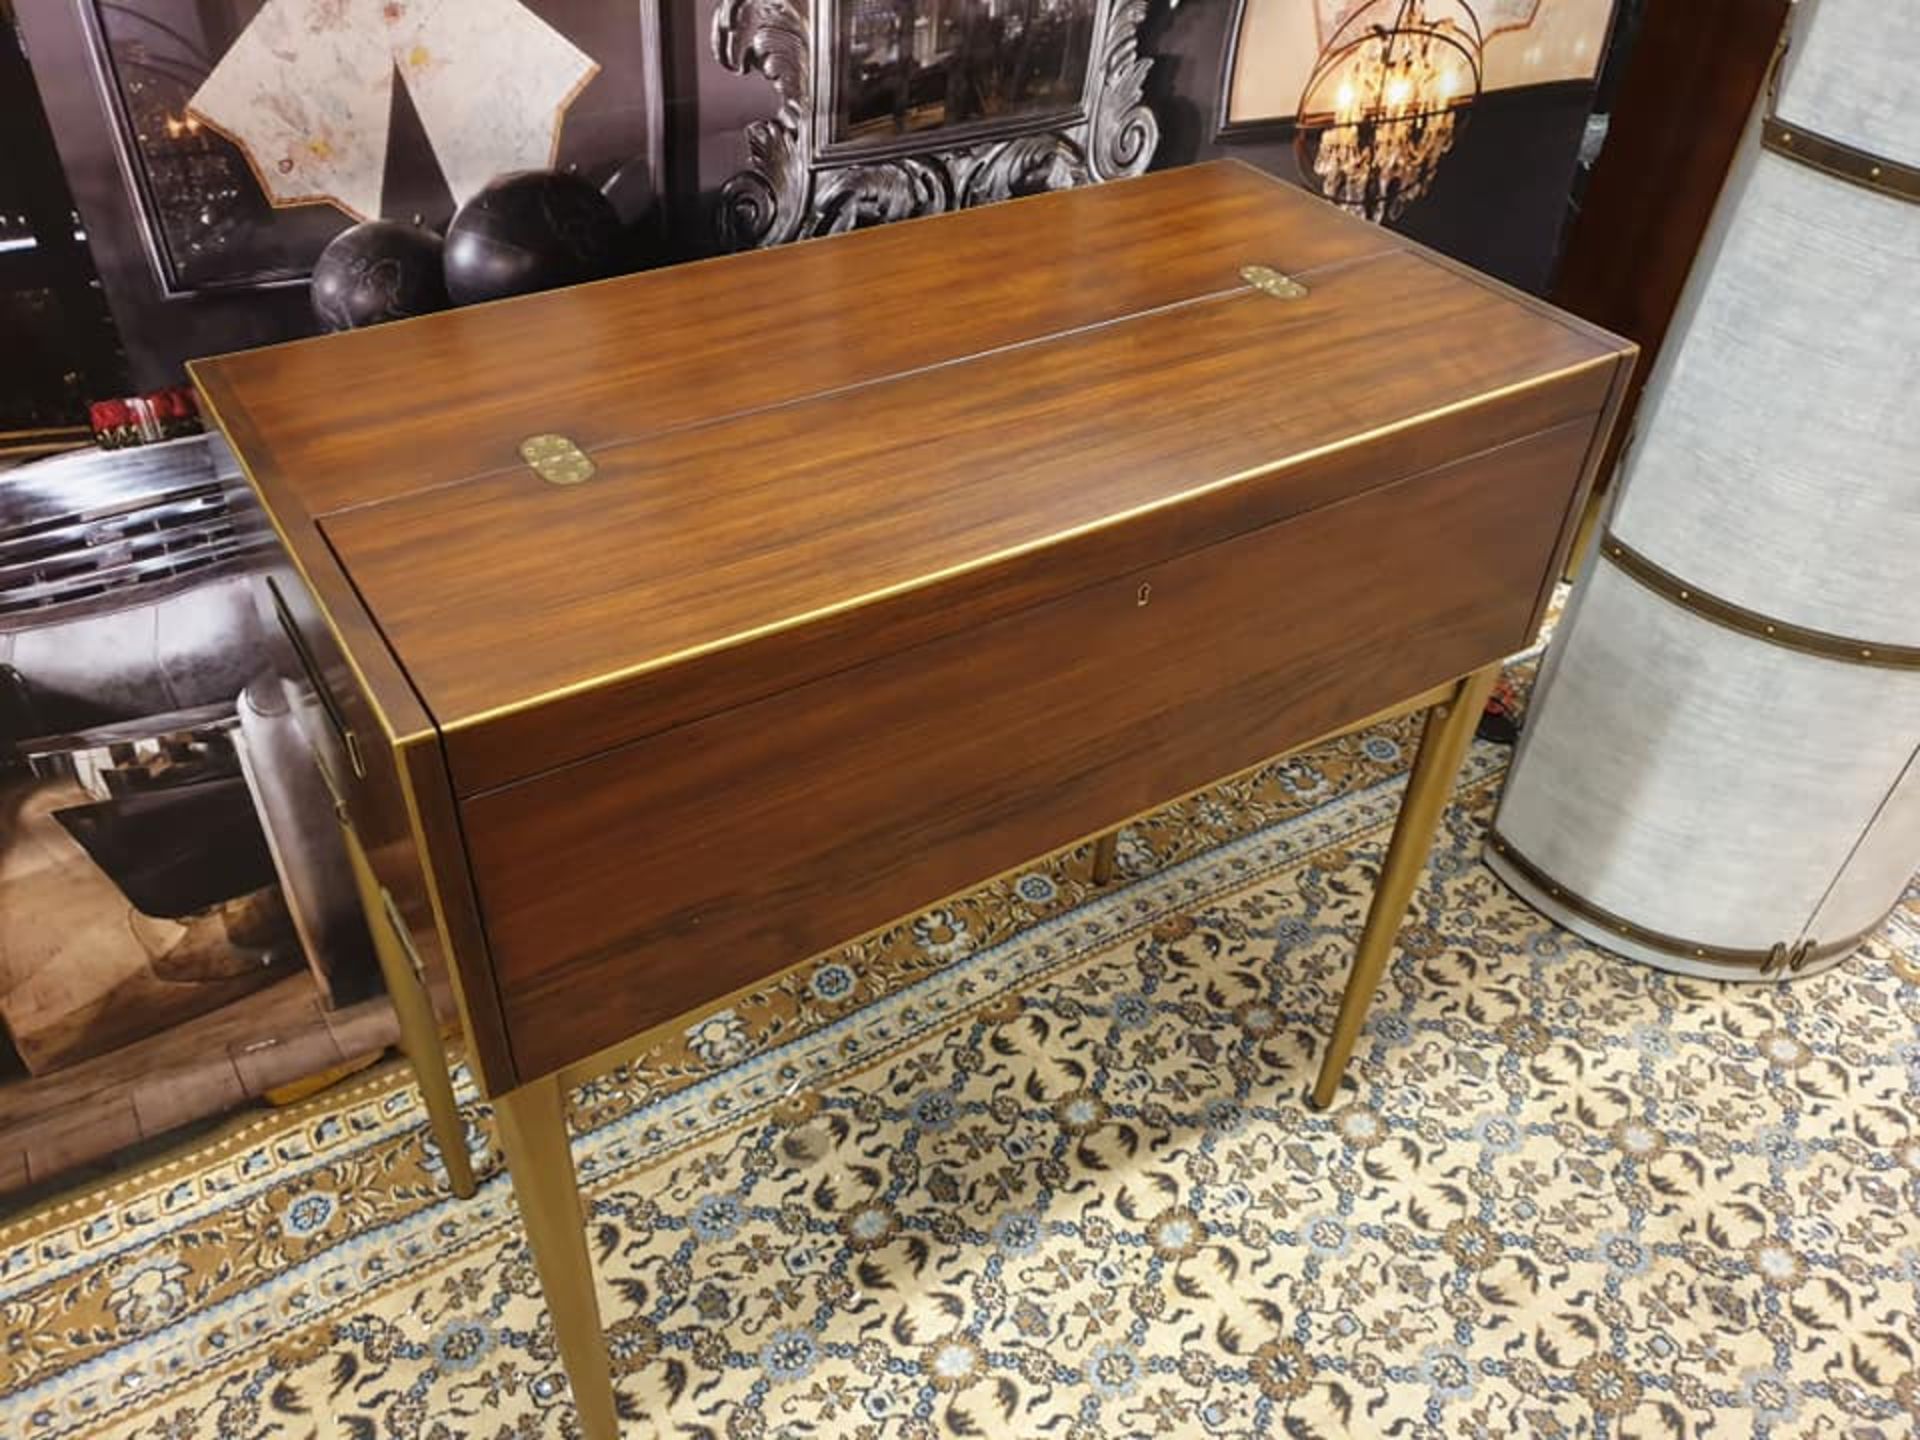 Starbay Acacia Walnut campaign writing desk with Brass trim and brass legs with leather strapping - Image 7 of 7